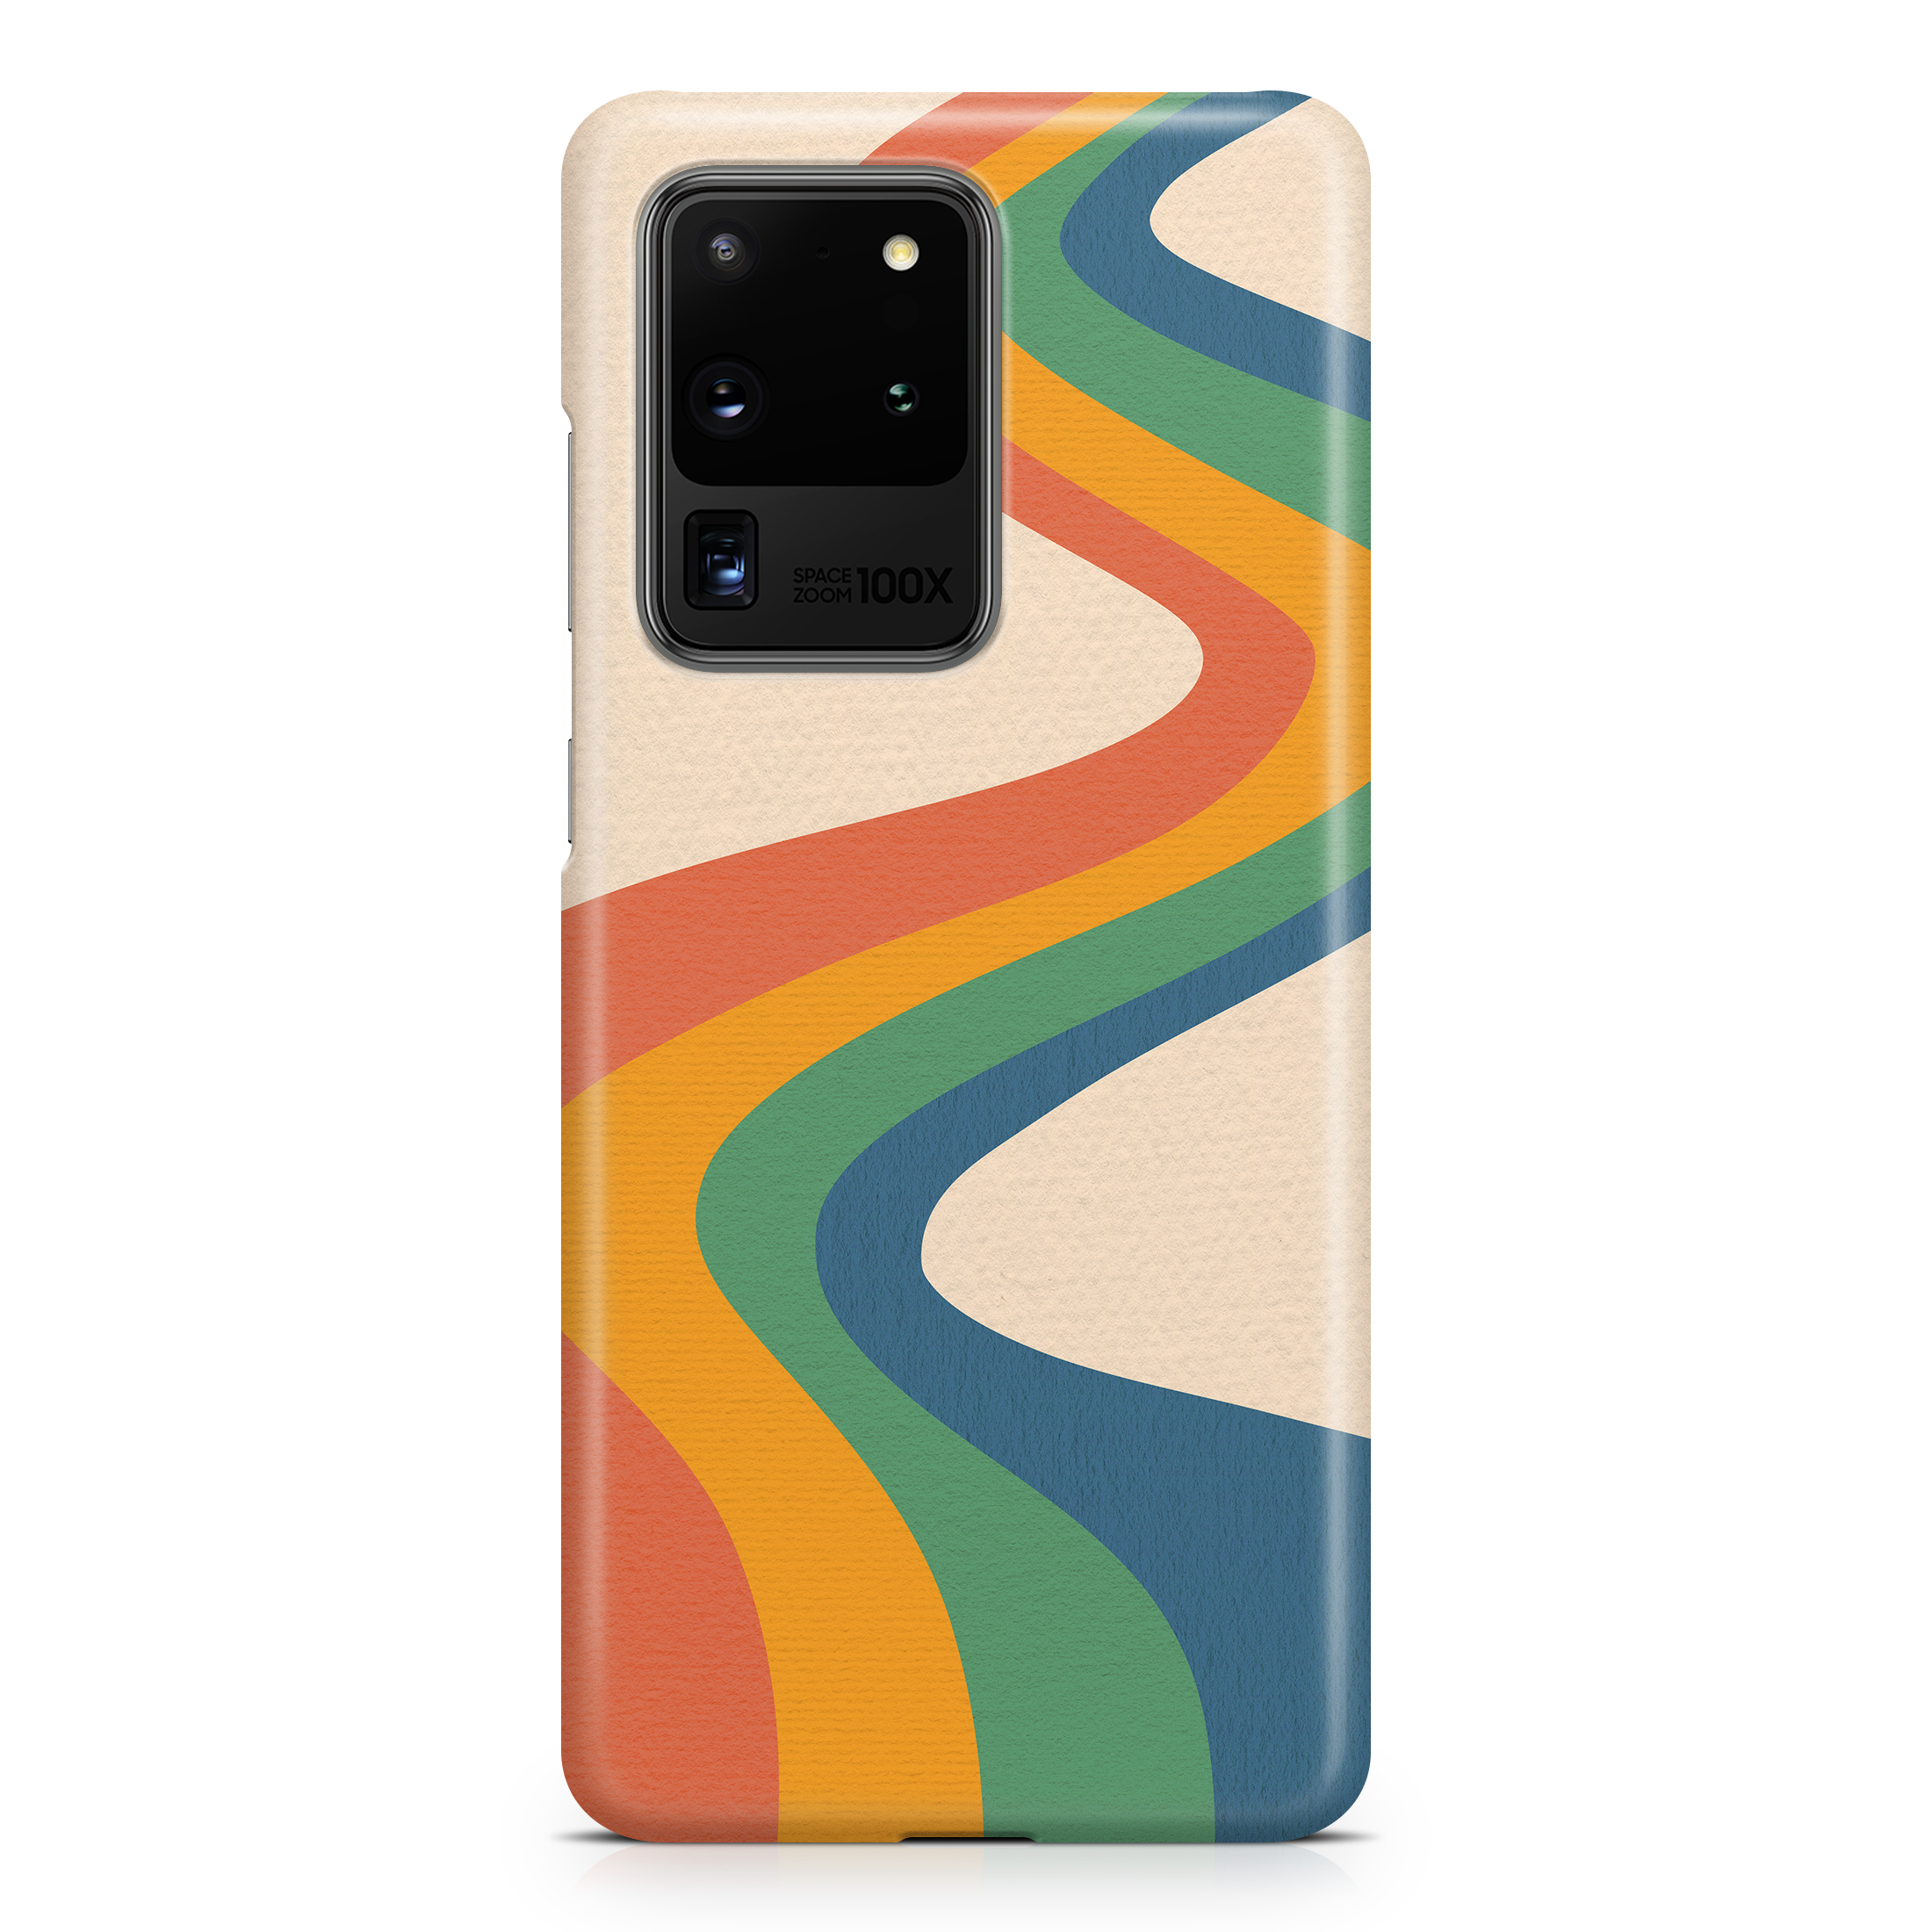 Slide into the Past - Samsung phone case designs by CaseSwagger